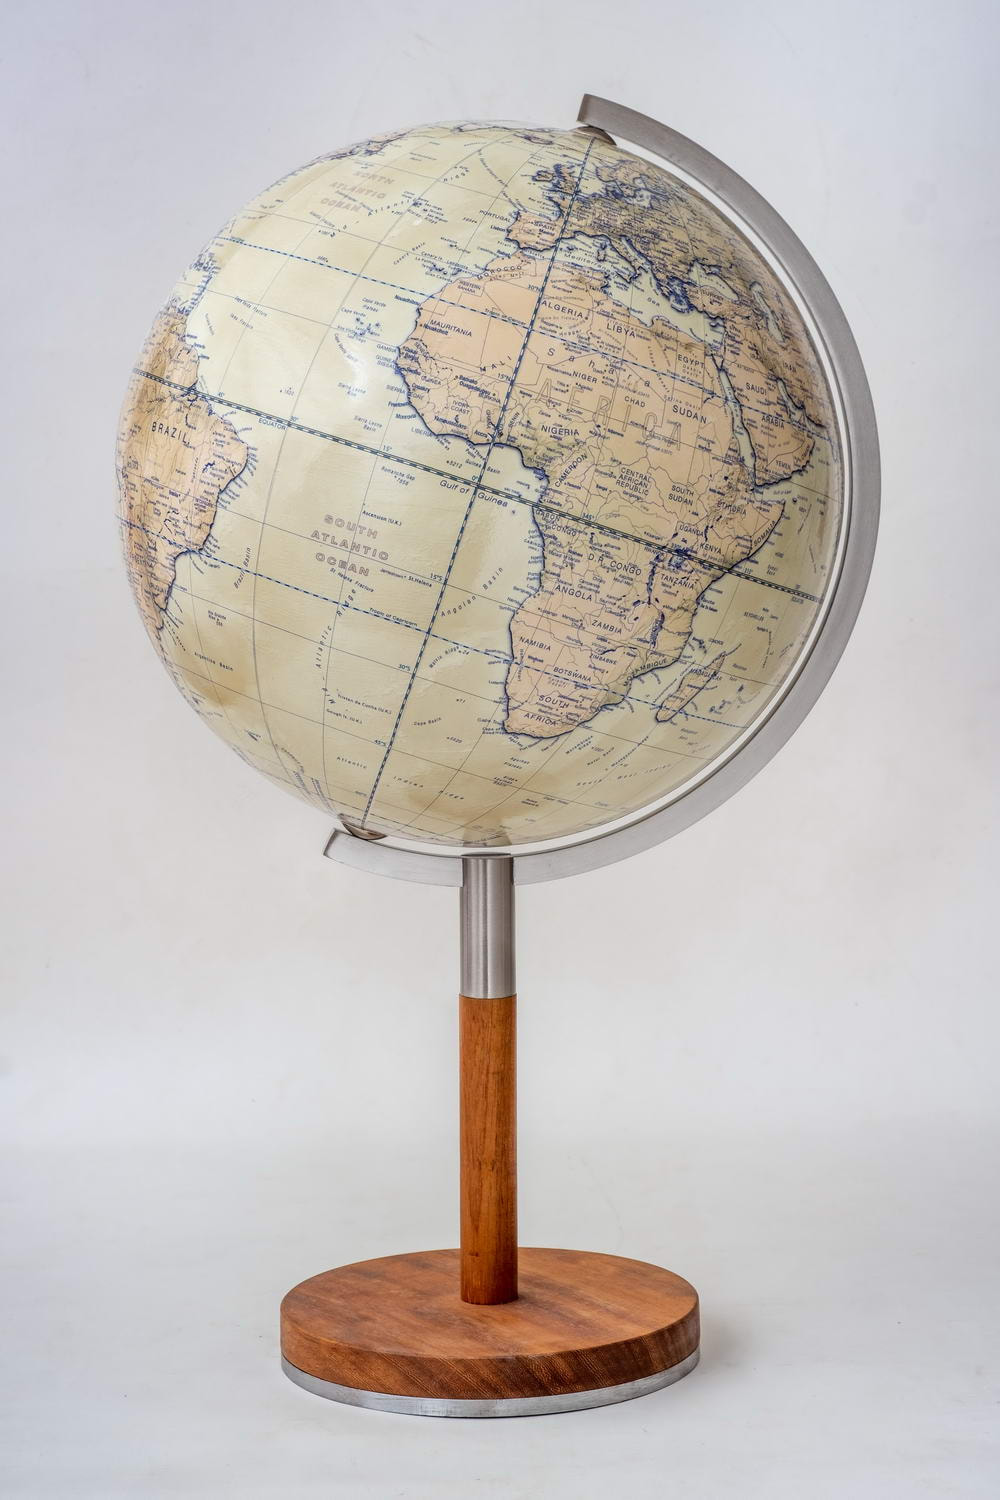 Nordic contemporary globe with wood stand and slim stem. Africa is shown on the globe.